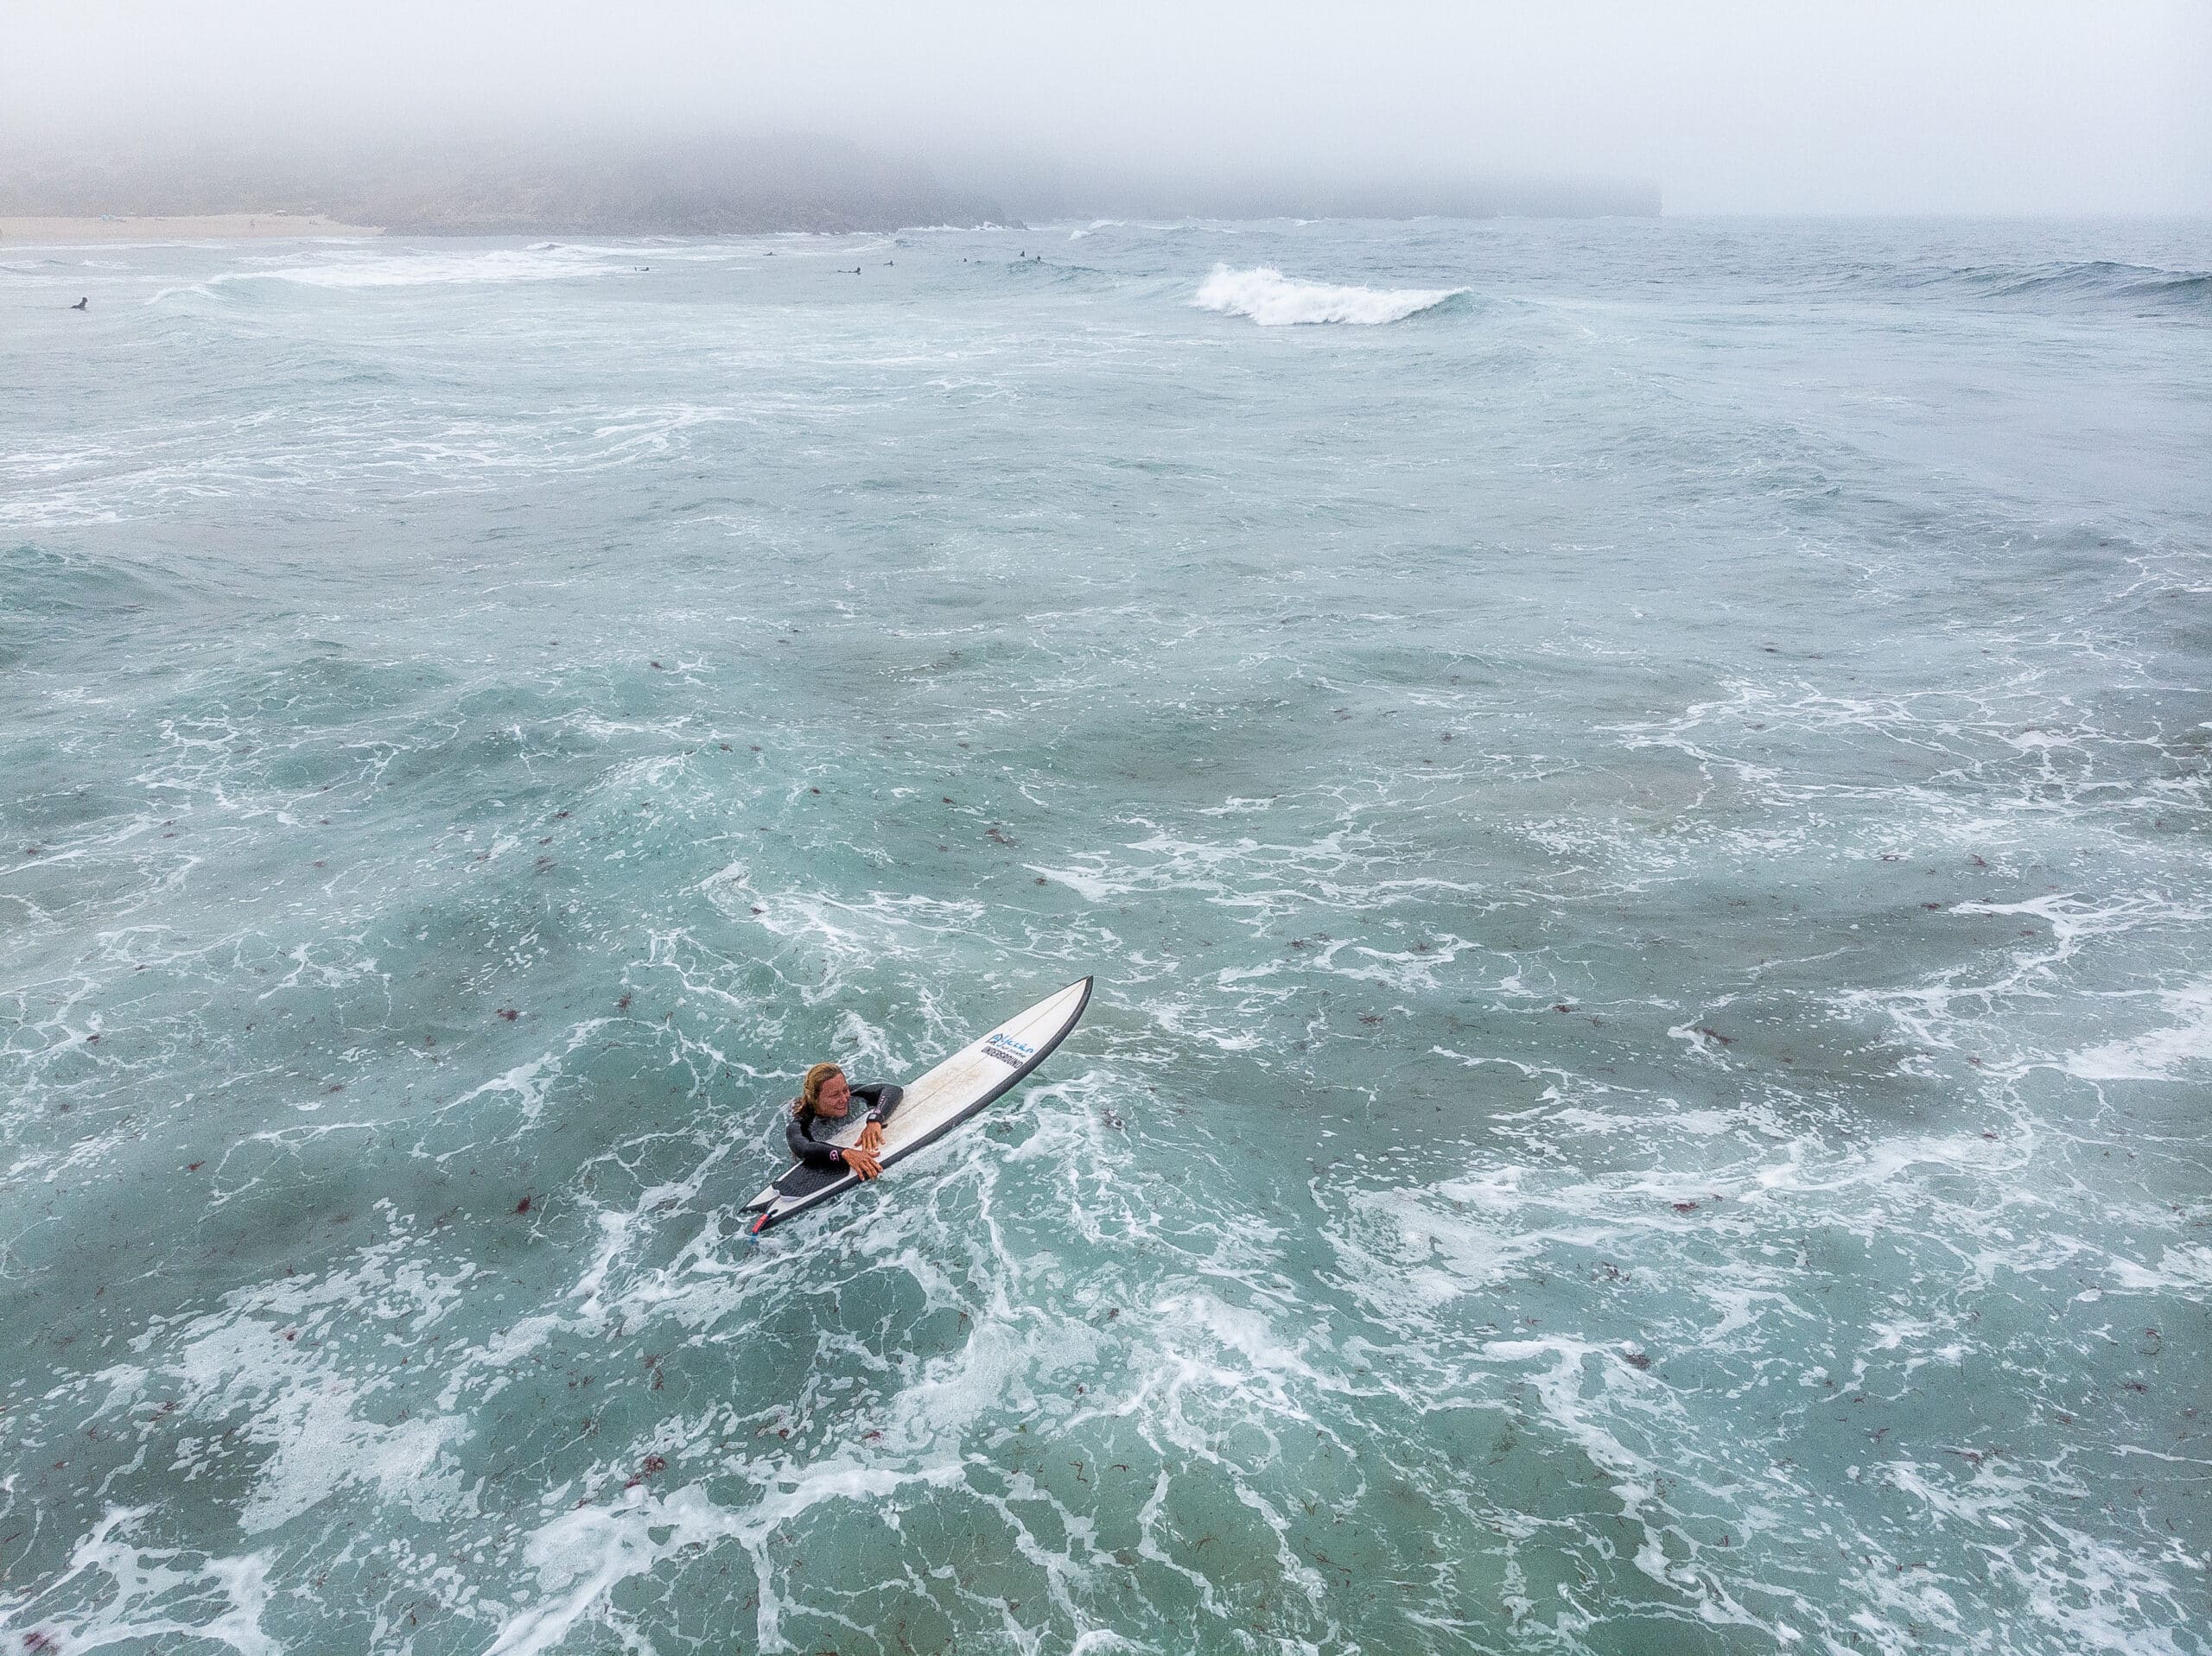 5 habits to avoid a frustrating surf session!